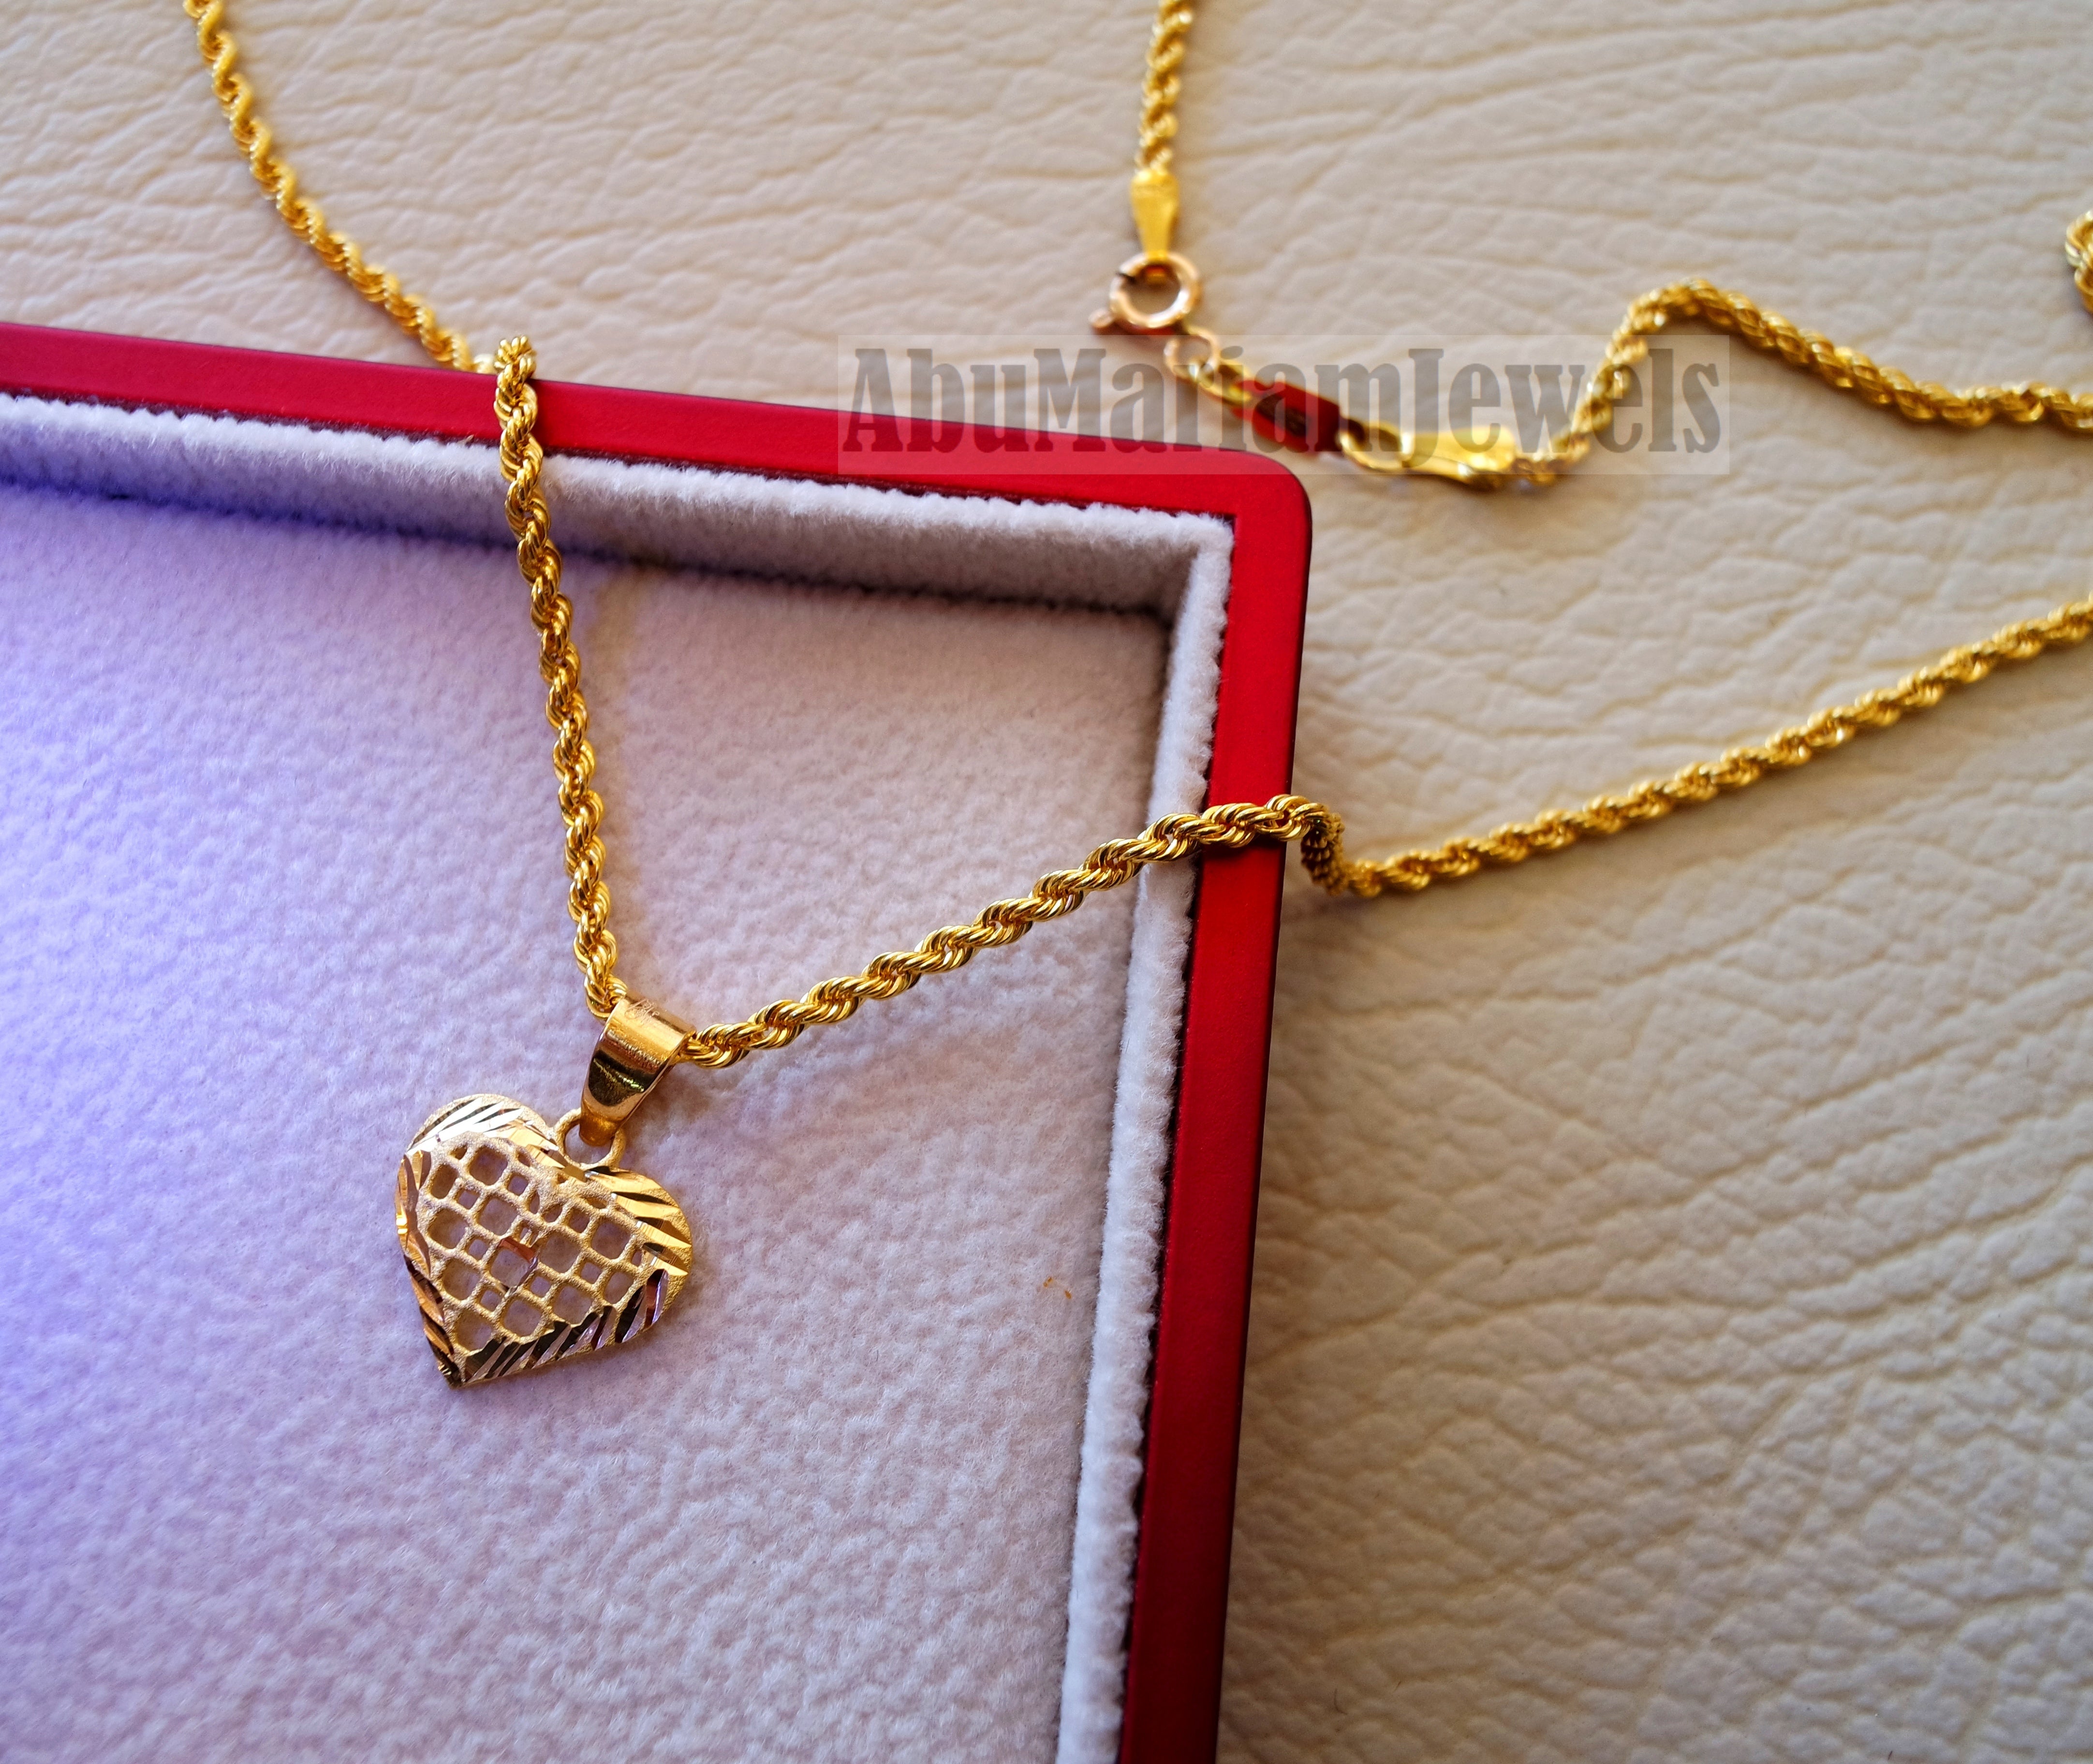 21K gold heart pendant with rope chain gold jewelry 16 and 20 inches fast shipping with gift box